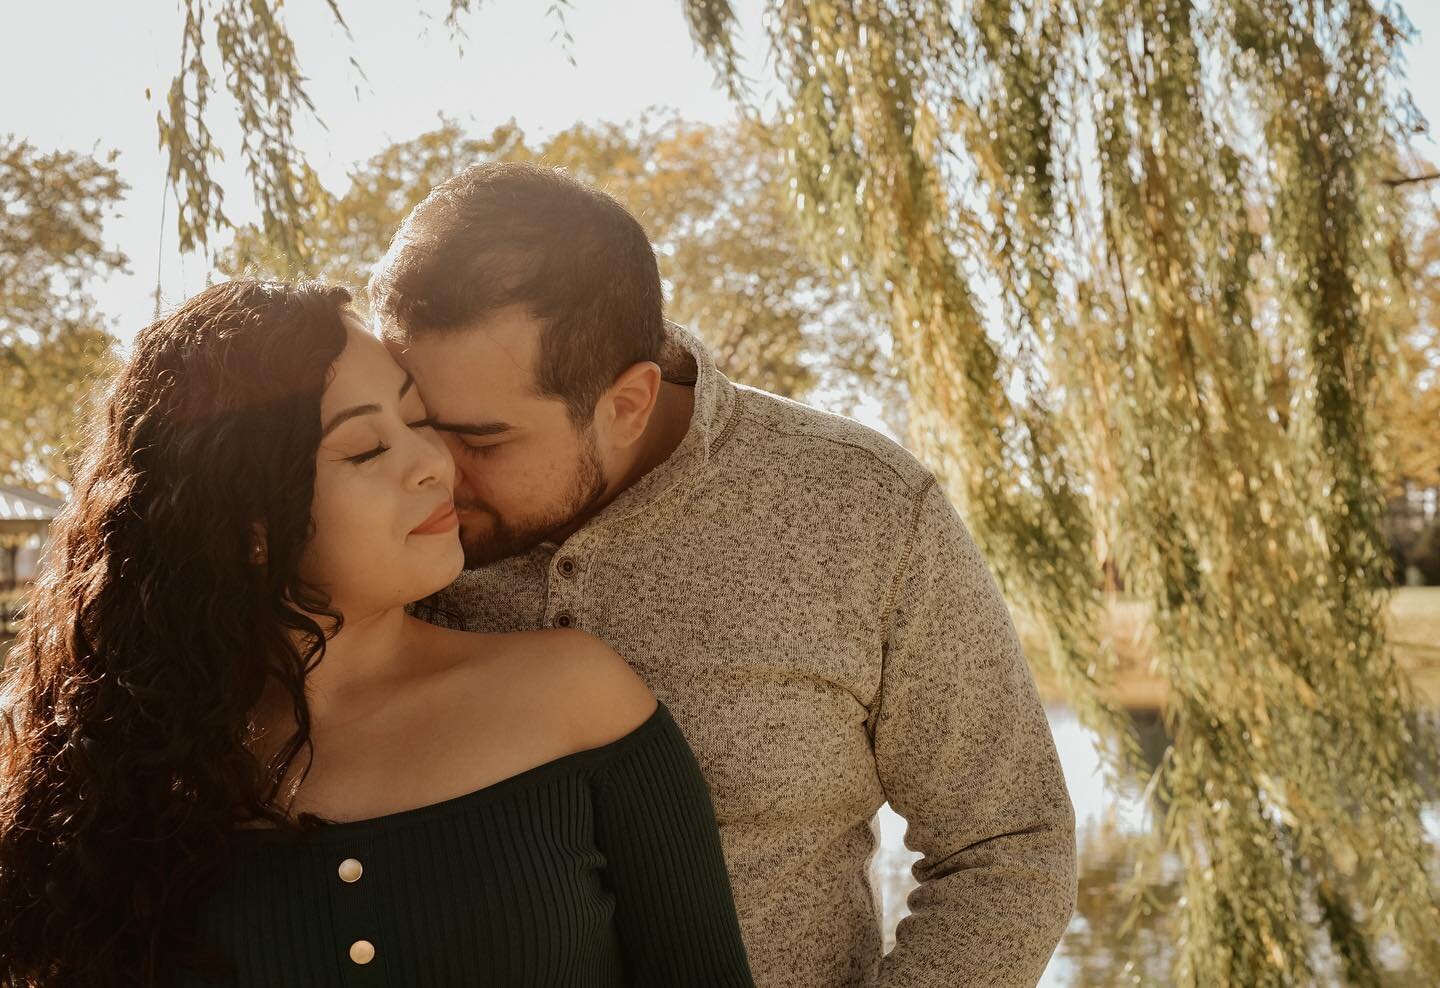 Wow, haven&rsquo;t posted since last year. Here&rsquo;s one of my favorite photographs of these two lovebirds 💛

Over the next few days I&rsquo;ll be throwing it back and posting pictures of my past sessions. 
I need to be better at sharing more 🙈